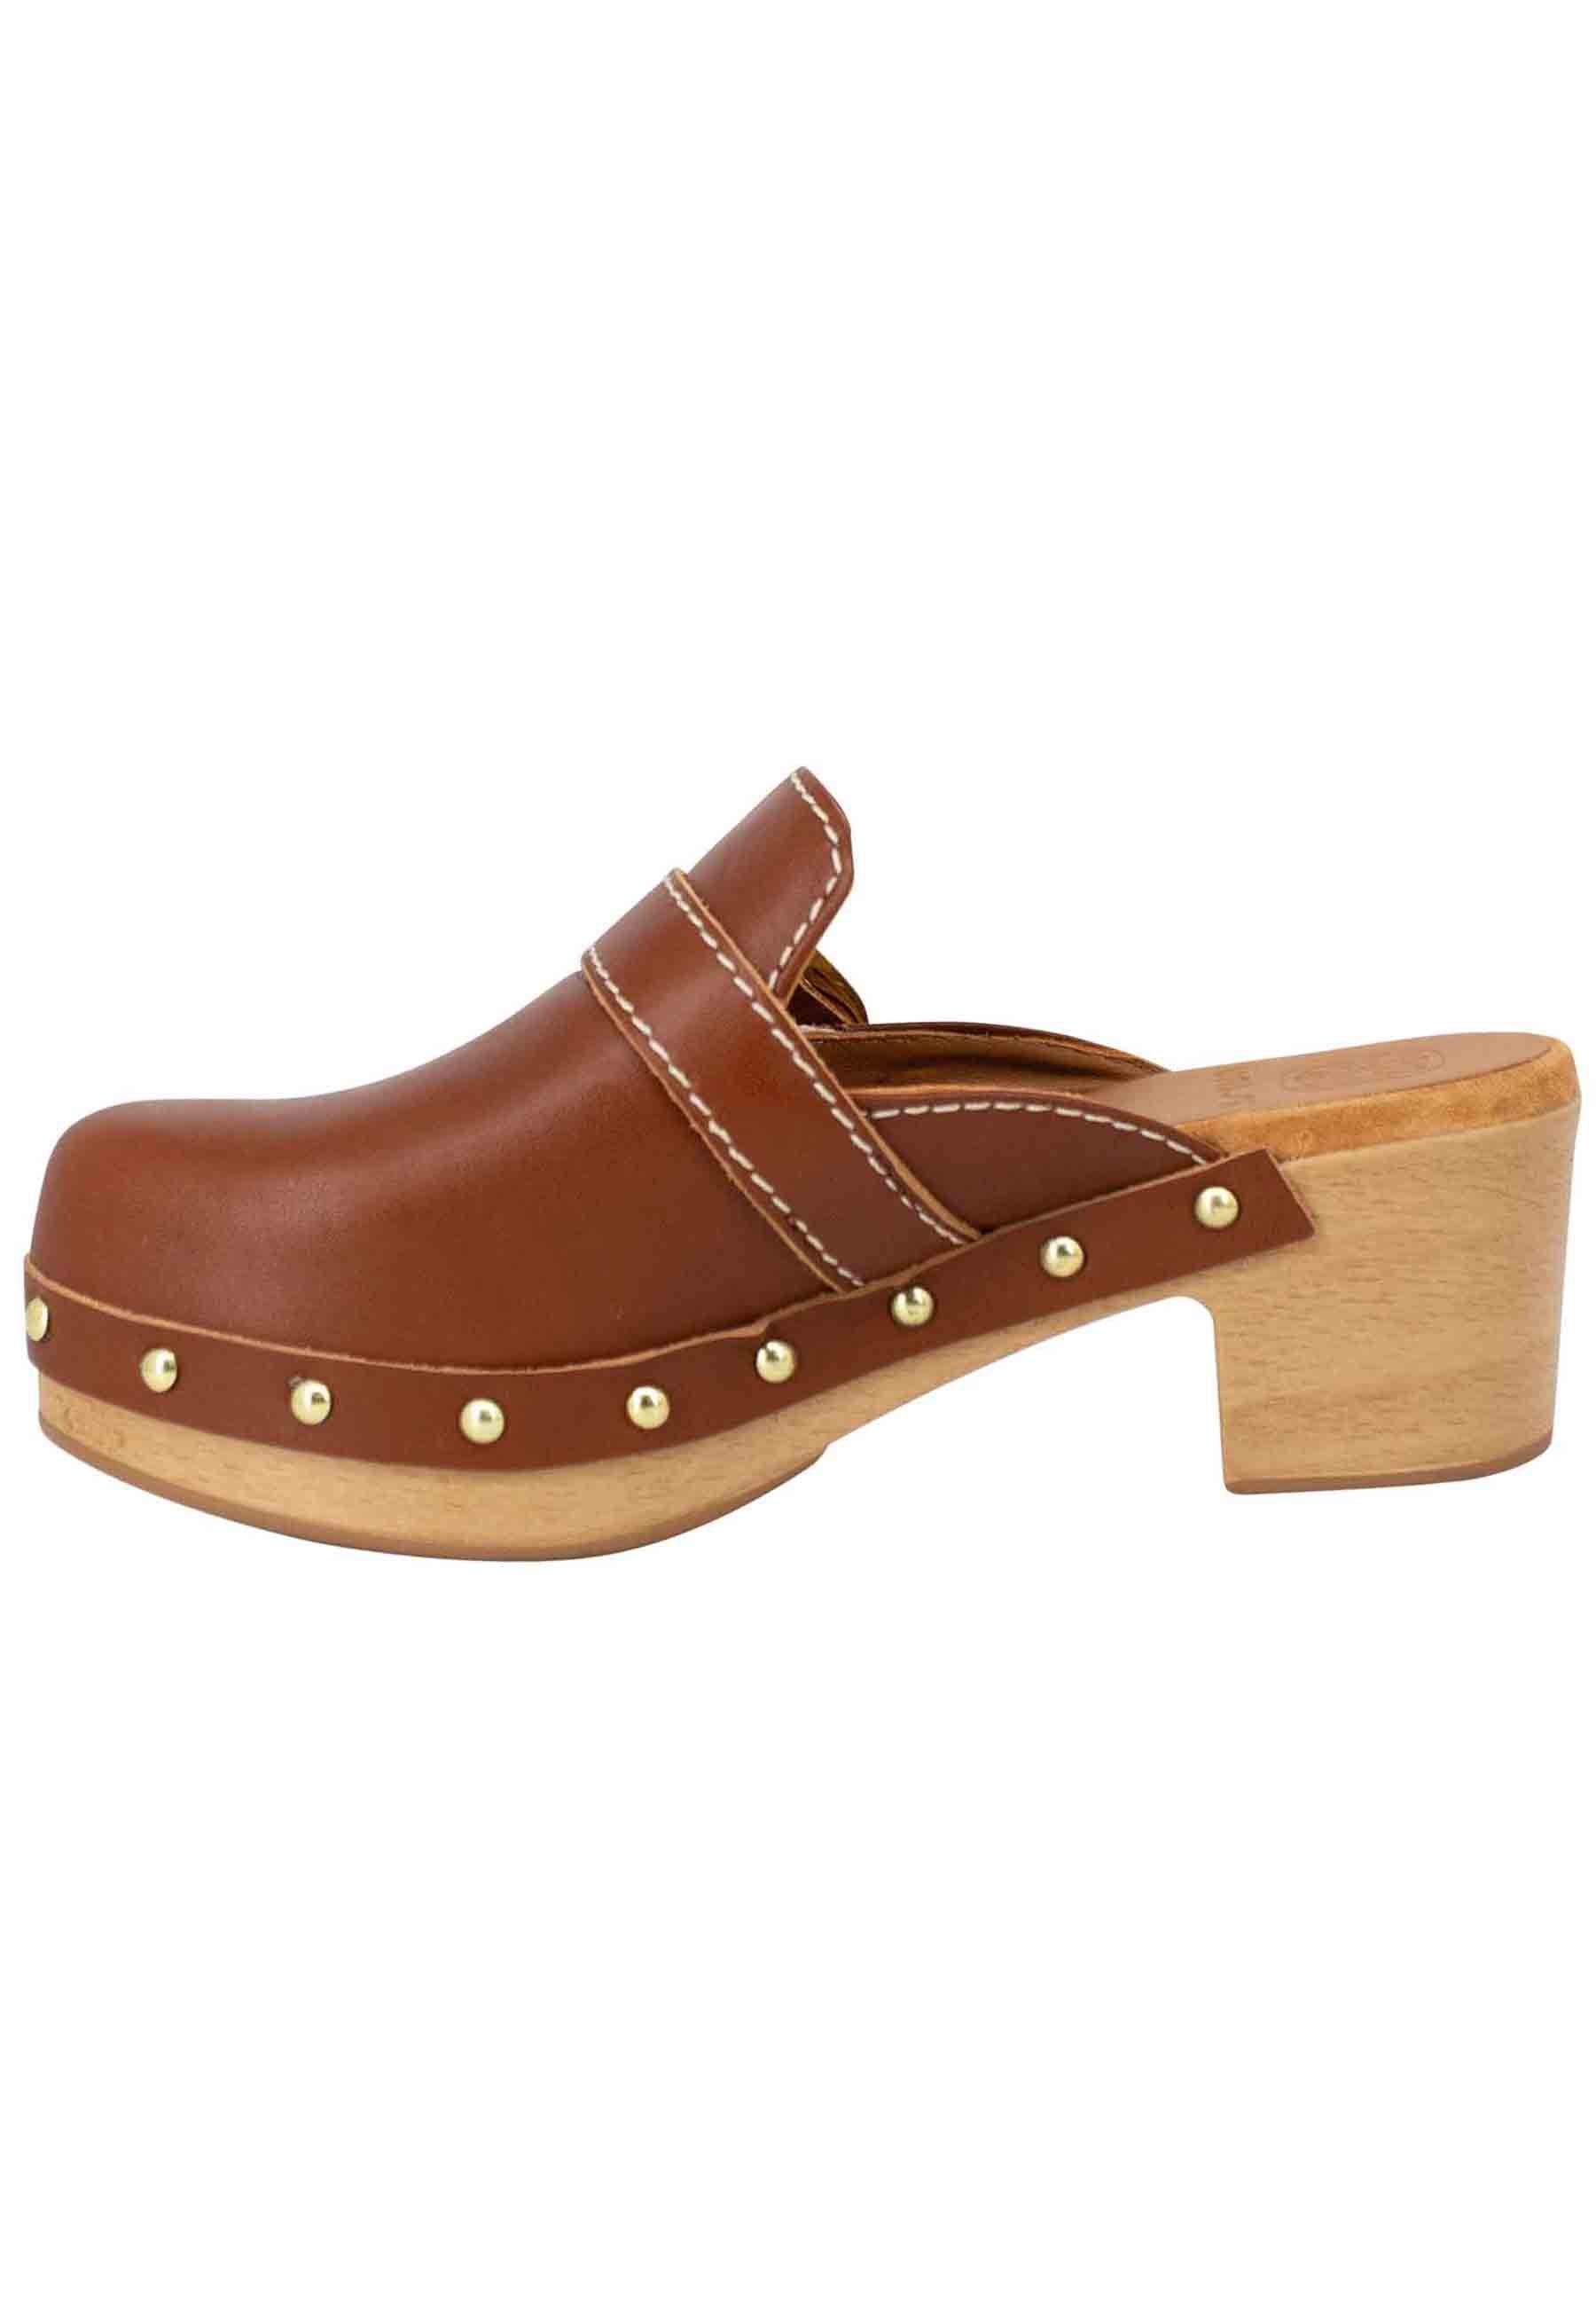 Women's clogs in tan leather with side buckle and closed toe